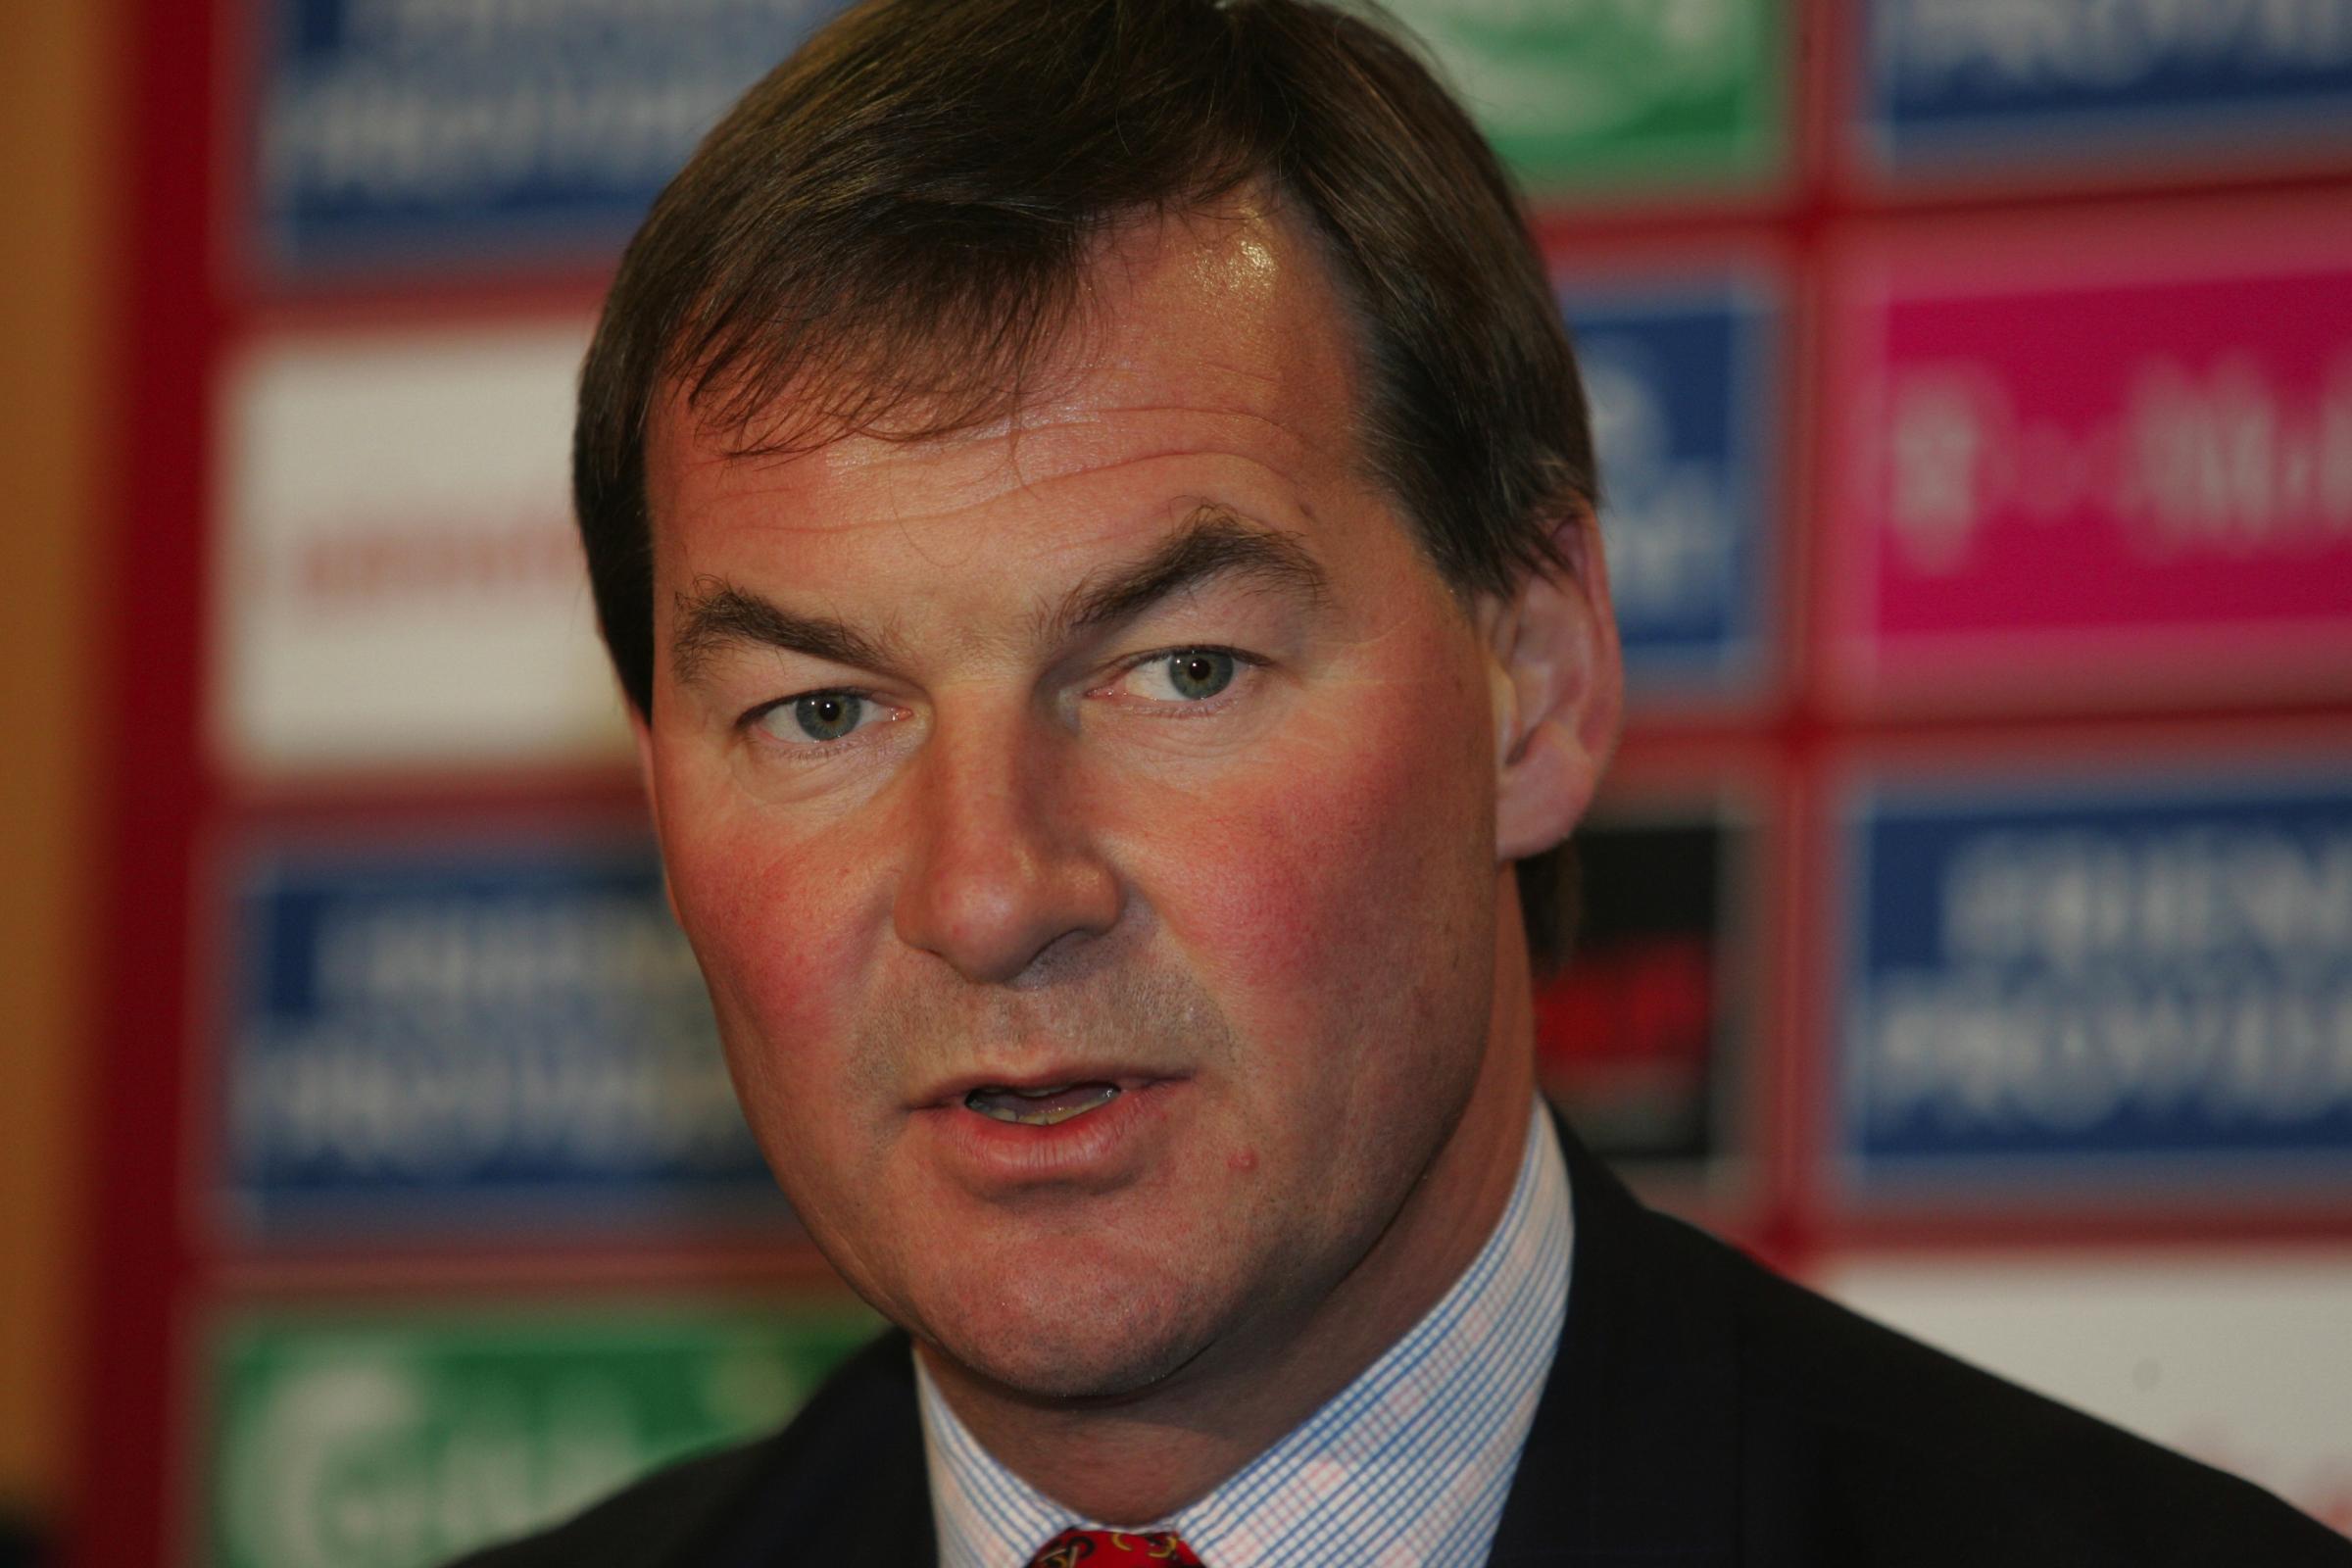 Former Southampton FC chairman Rupert Lowe elected as MP for Reform